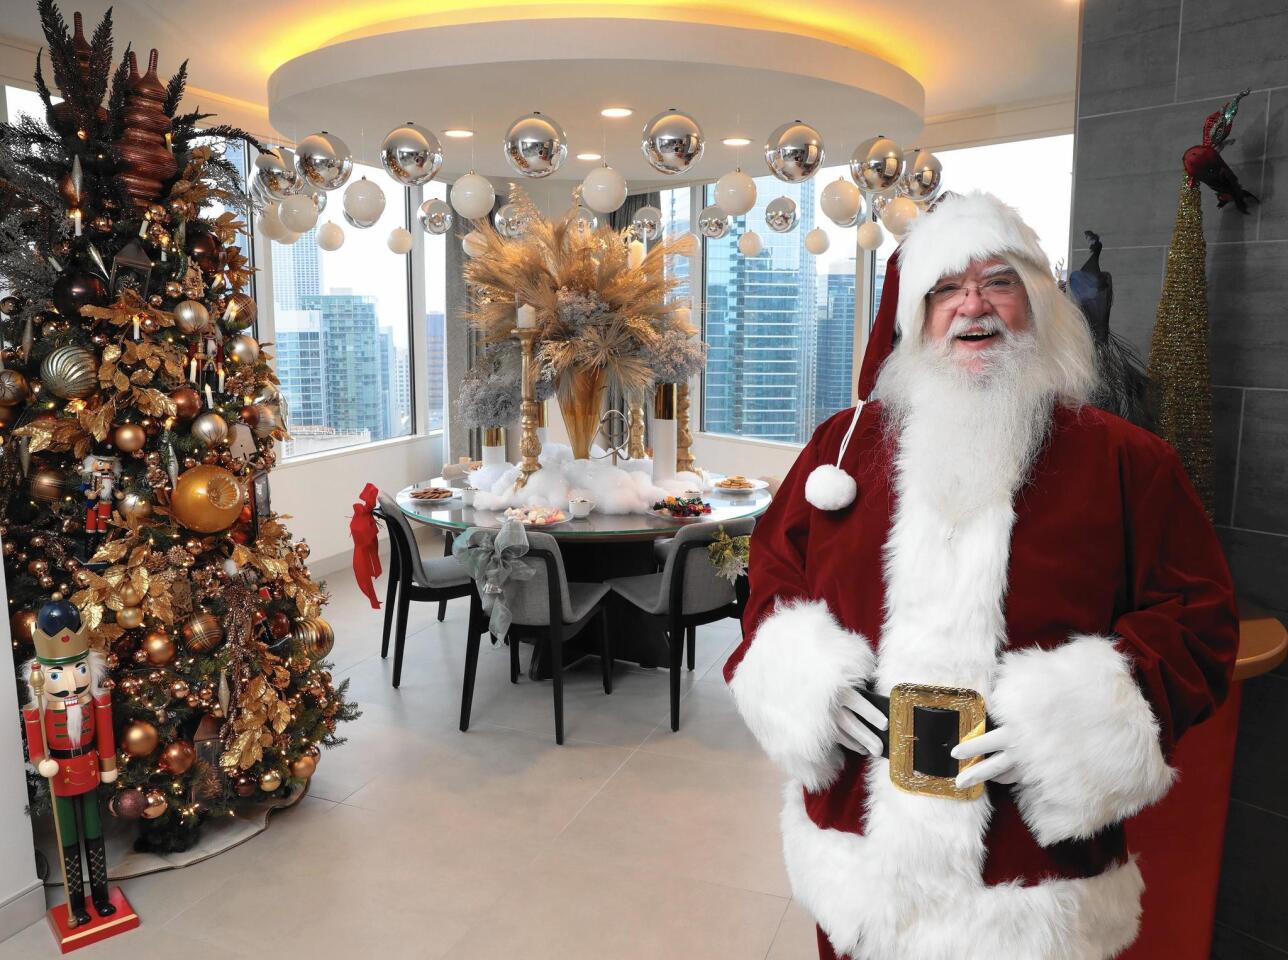 In addiition to public visits, people can rent the Santa Suite for 90-minute private functions. For an extra fee, Santa will be there too.